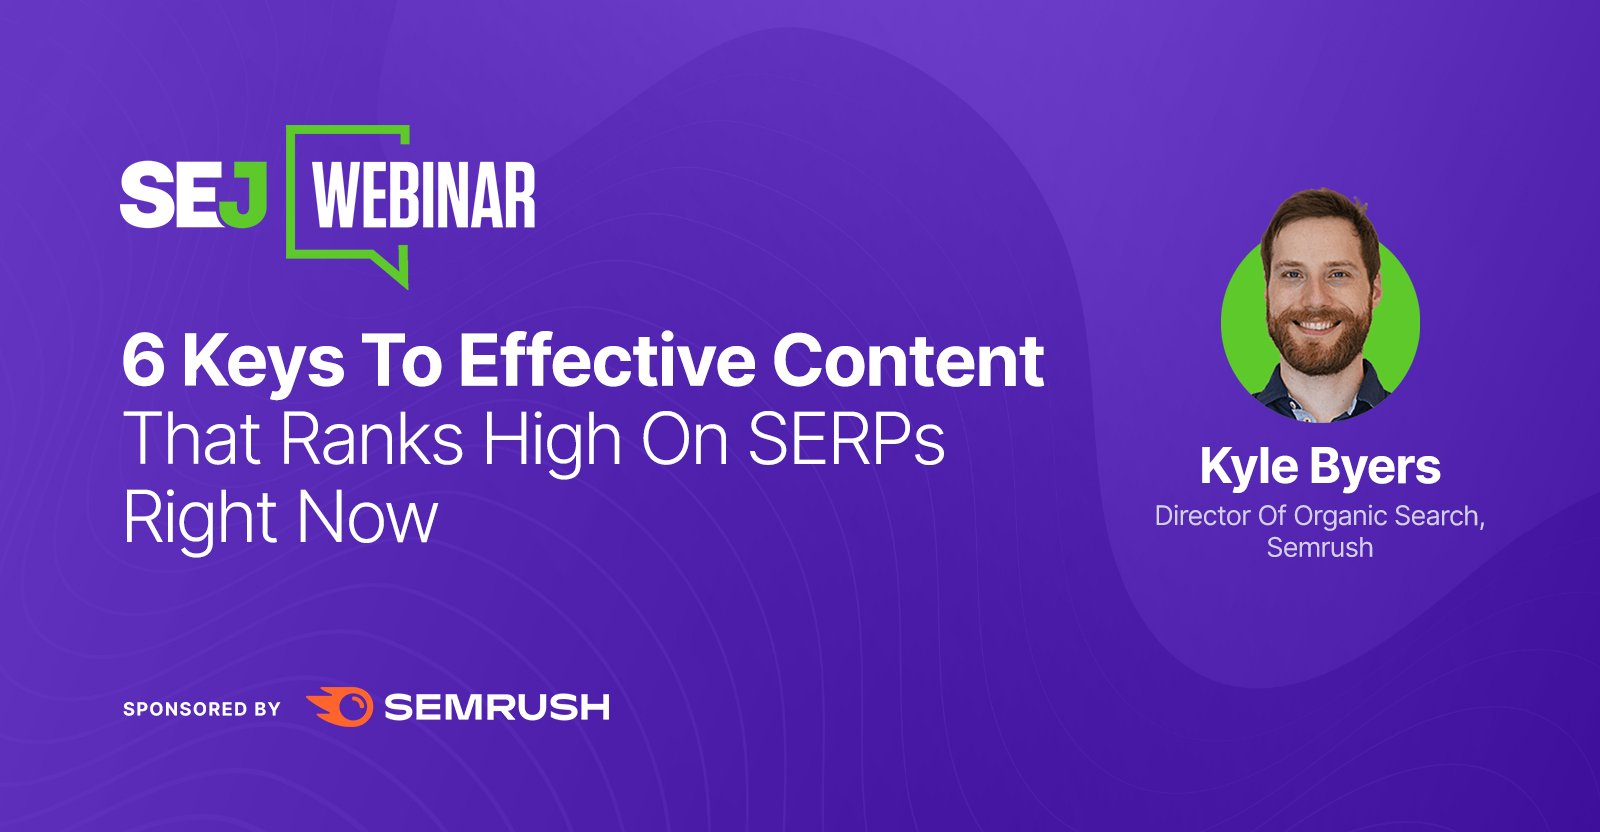 6 Keys To Effective Content That Ranks High On SERPs [Webinar]